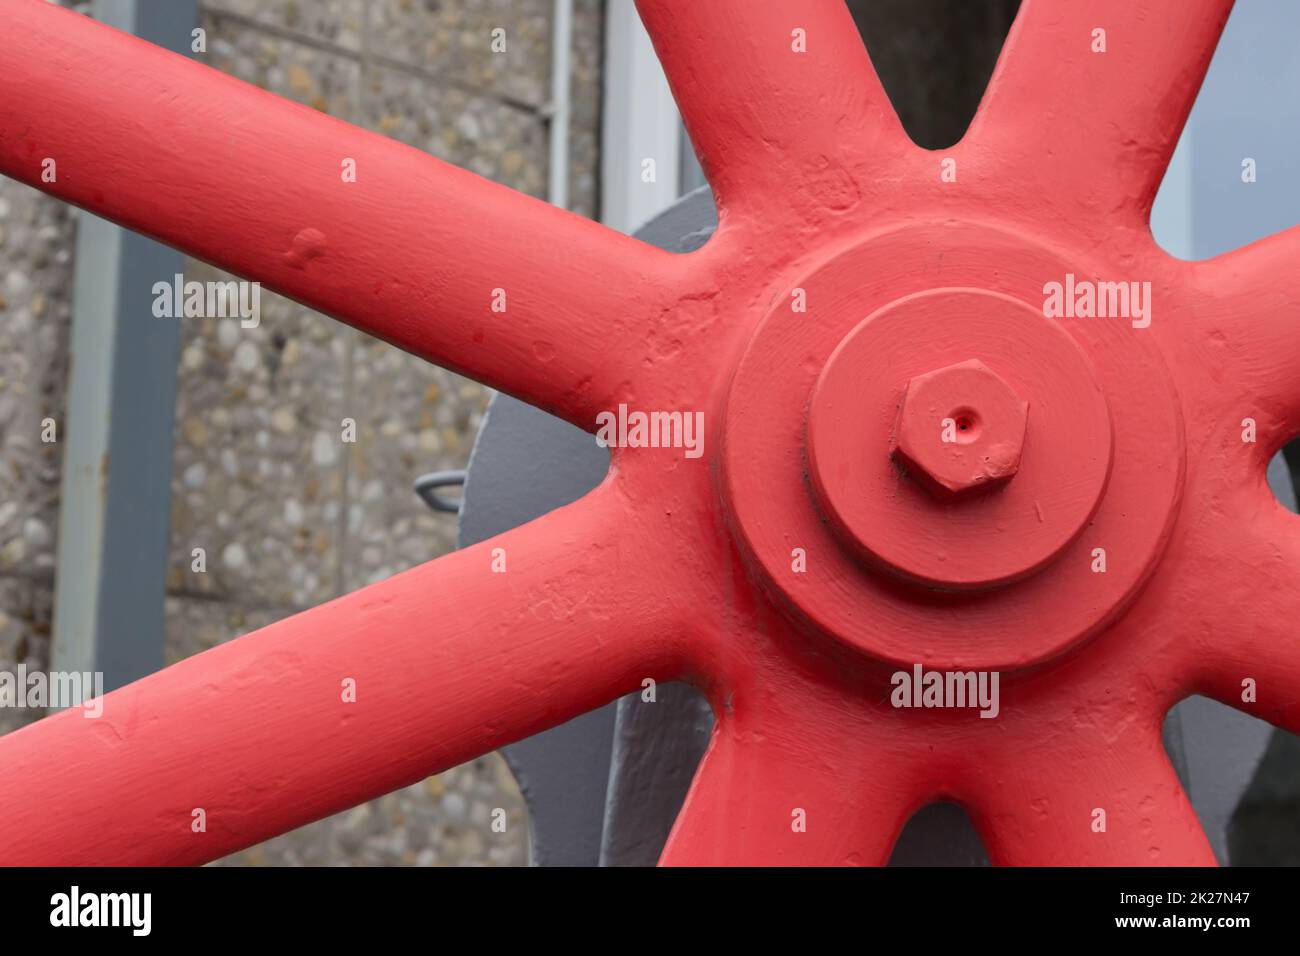 Detail of a large wheel / heavy industry / mining Stock Photo